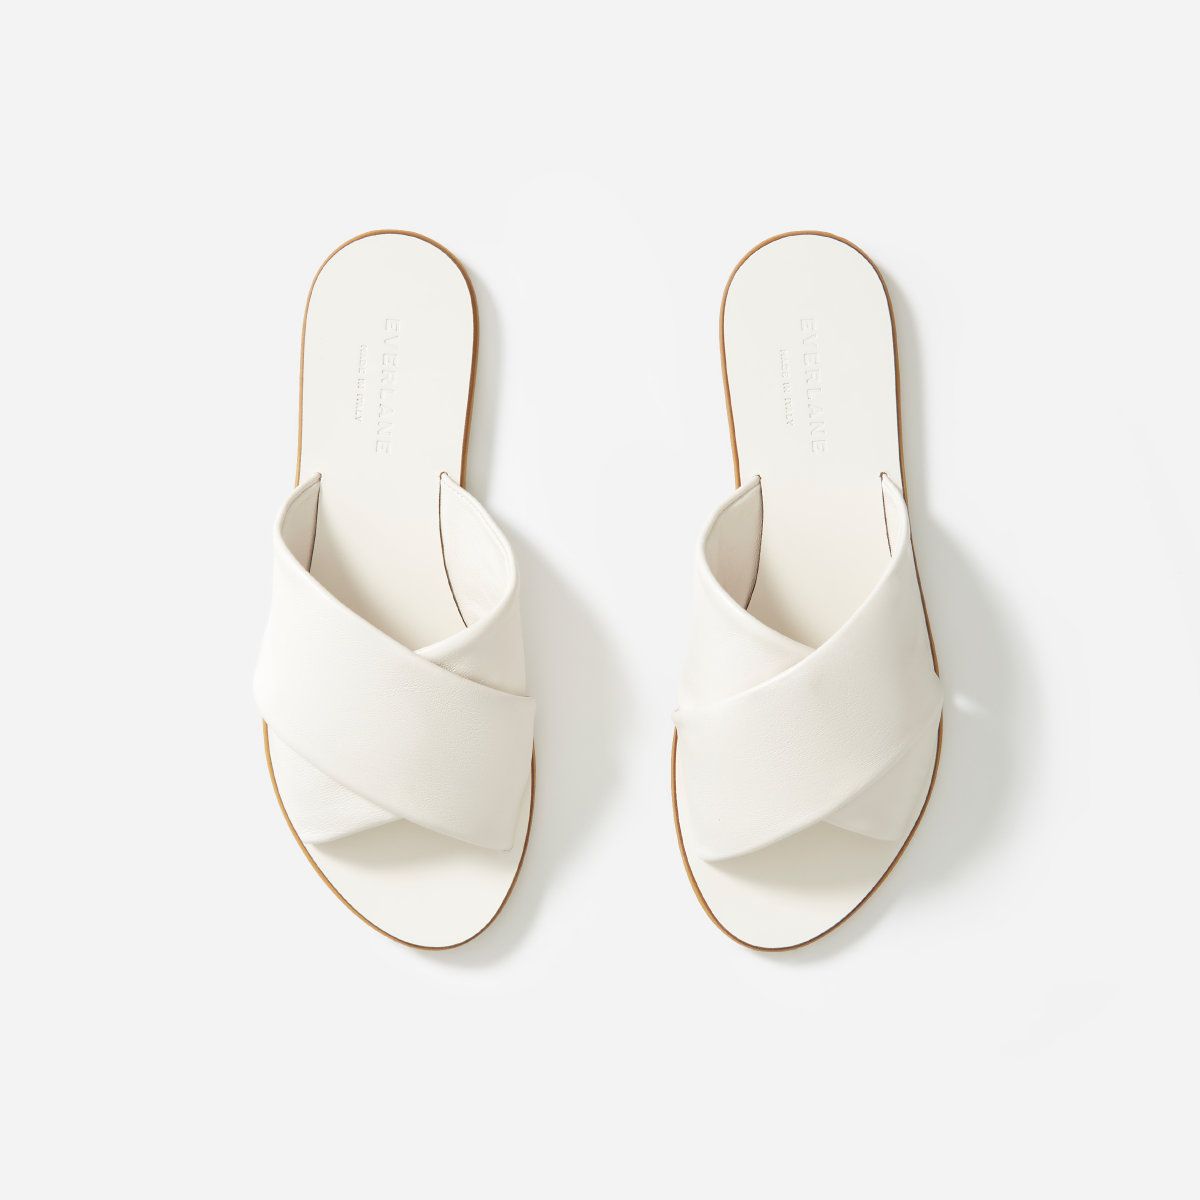 The Day Crossover Sandal | Everlane